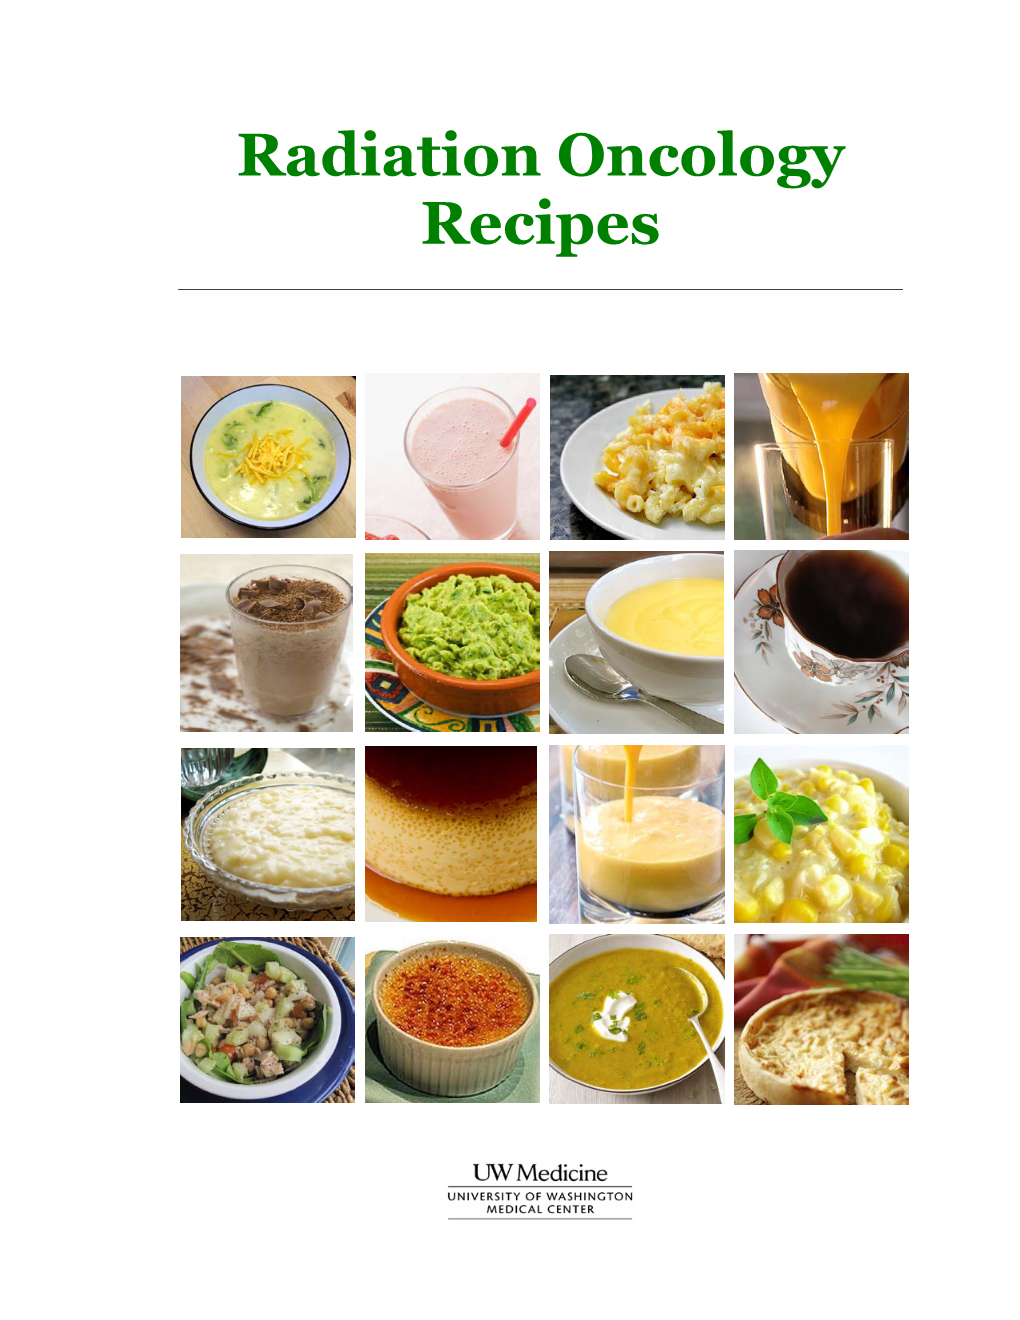 Radiation Oncology Recipes